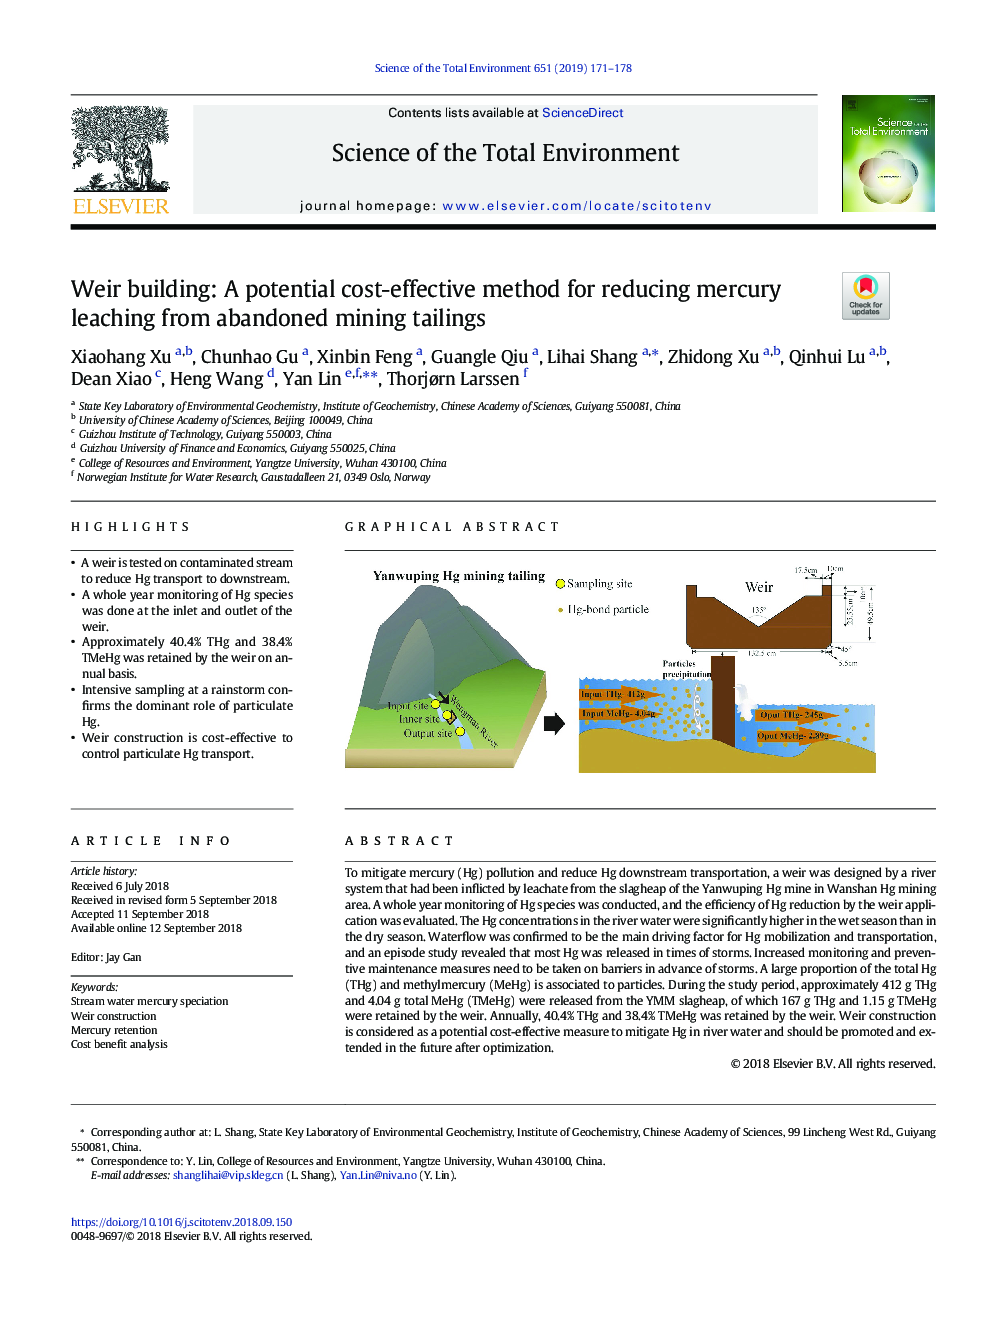 Weir building: A potential cost-effective method for reducing mercury leaching from abandoned mining tailings